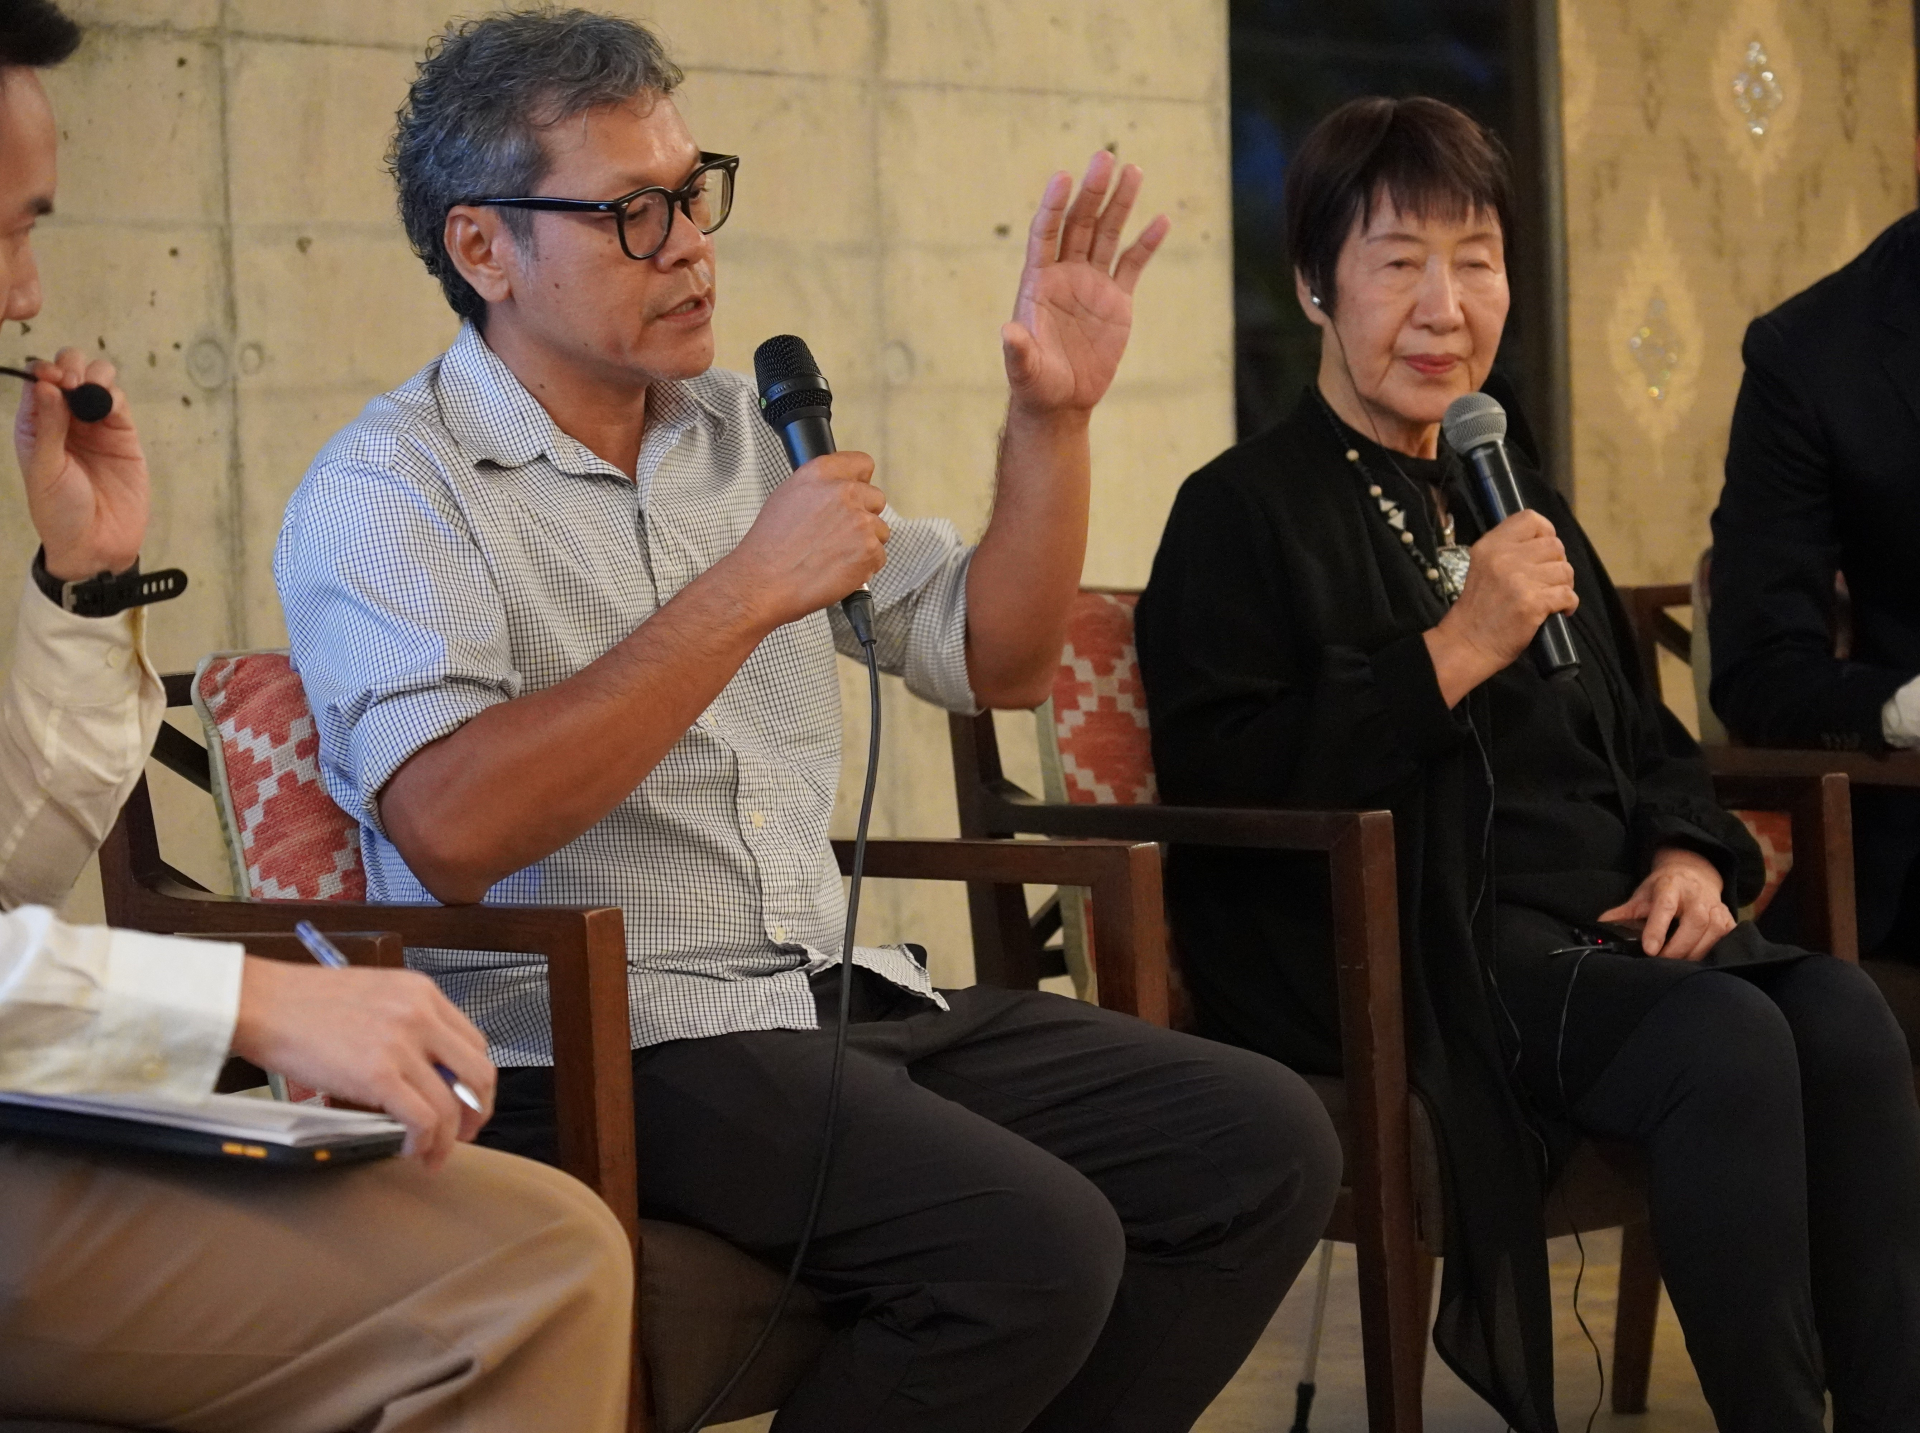 From left: Thai creator Pratchaya Phinthong and Ms. Tanaka answer questions from the audience during the dialogue event.